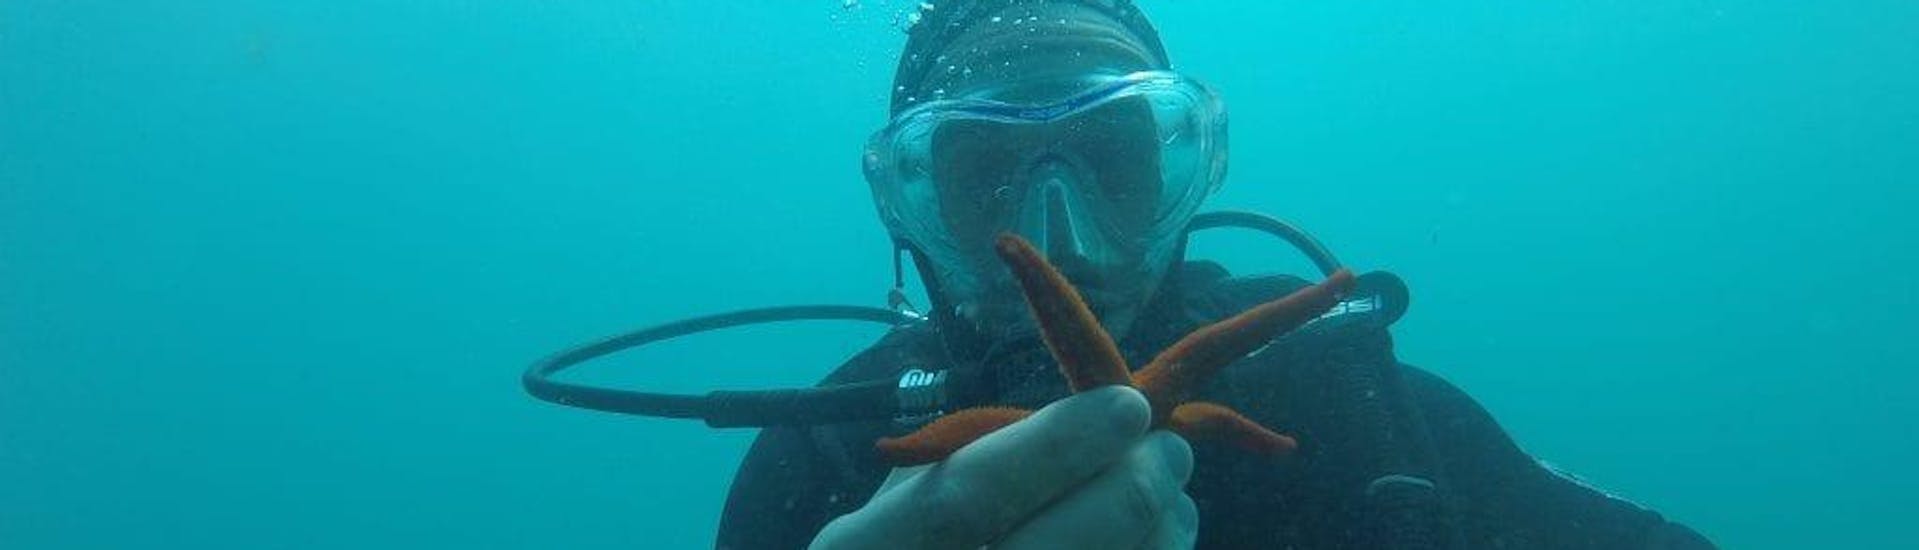 A diver found a red starfish underwater durig the Guided Boat Dives in Saint-Raphaël bay for Certified Diverswith Dive Is Fun.